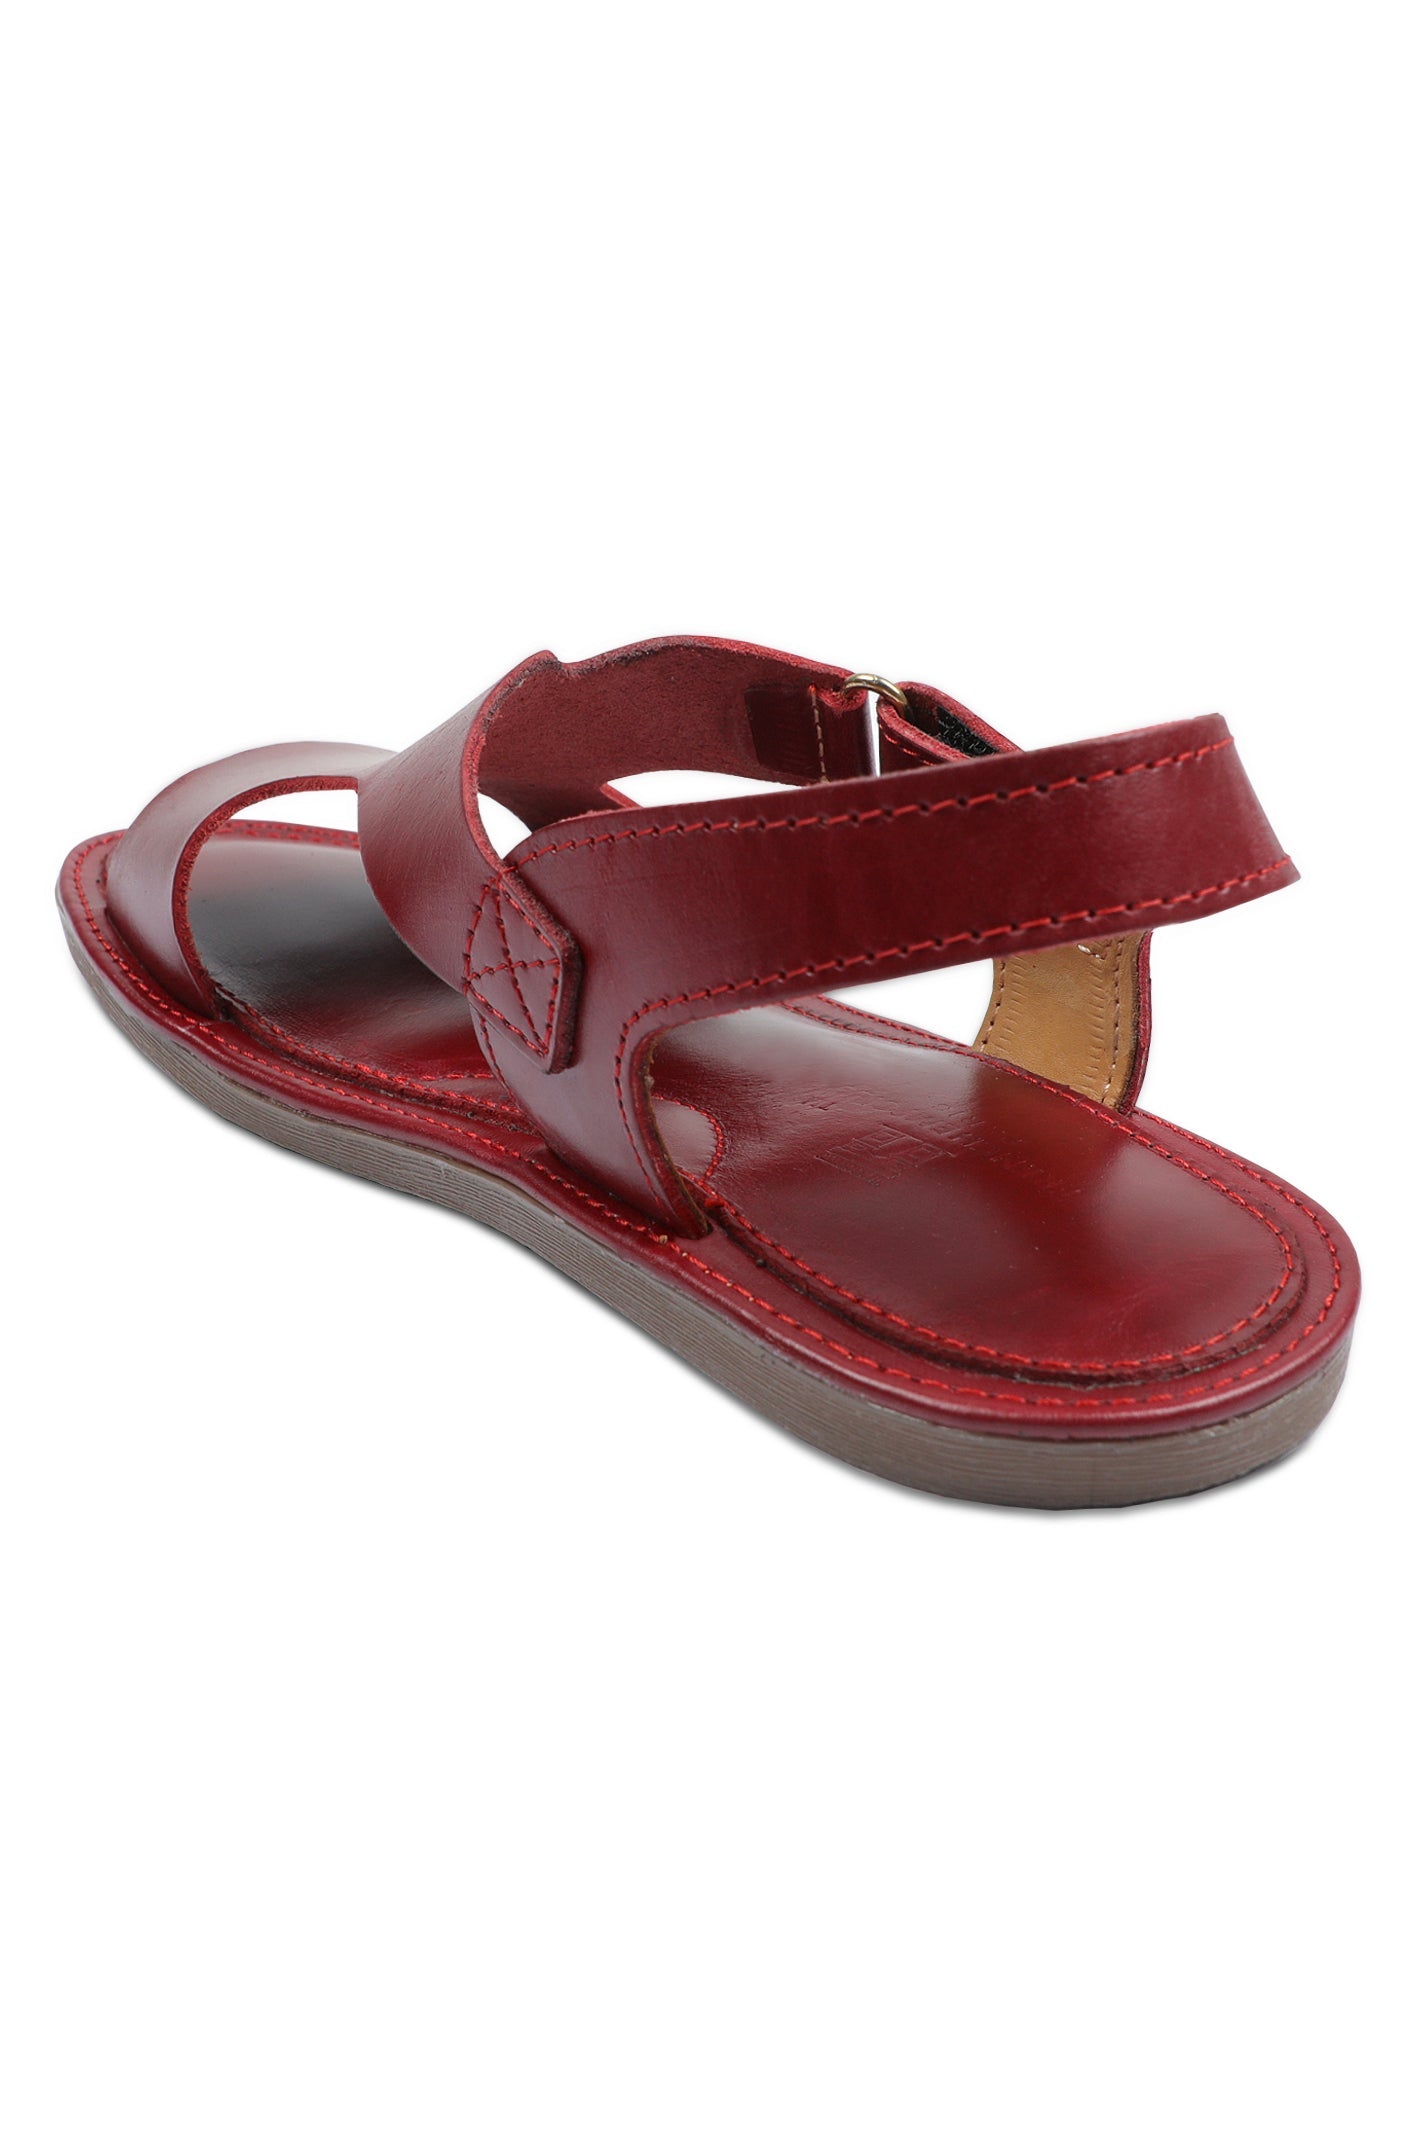 French Emporio Men Sandals SKU: SLD-0030-MEHROON - Diners